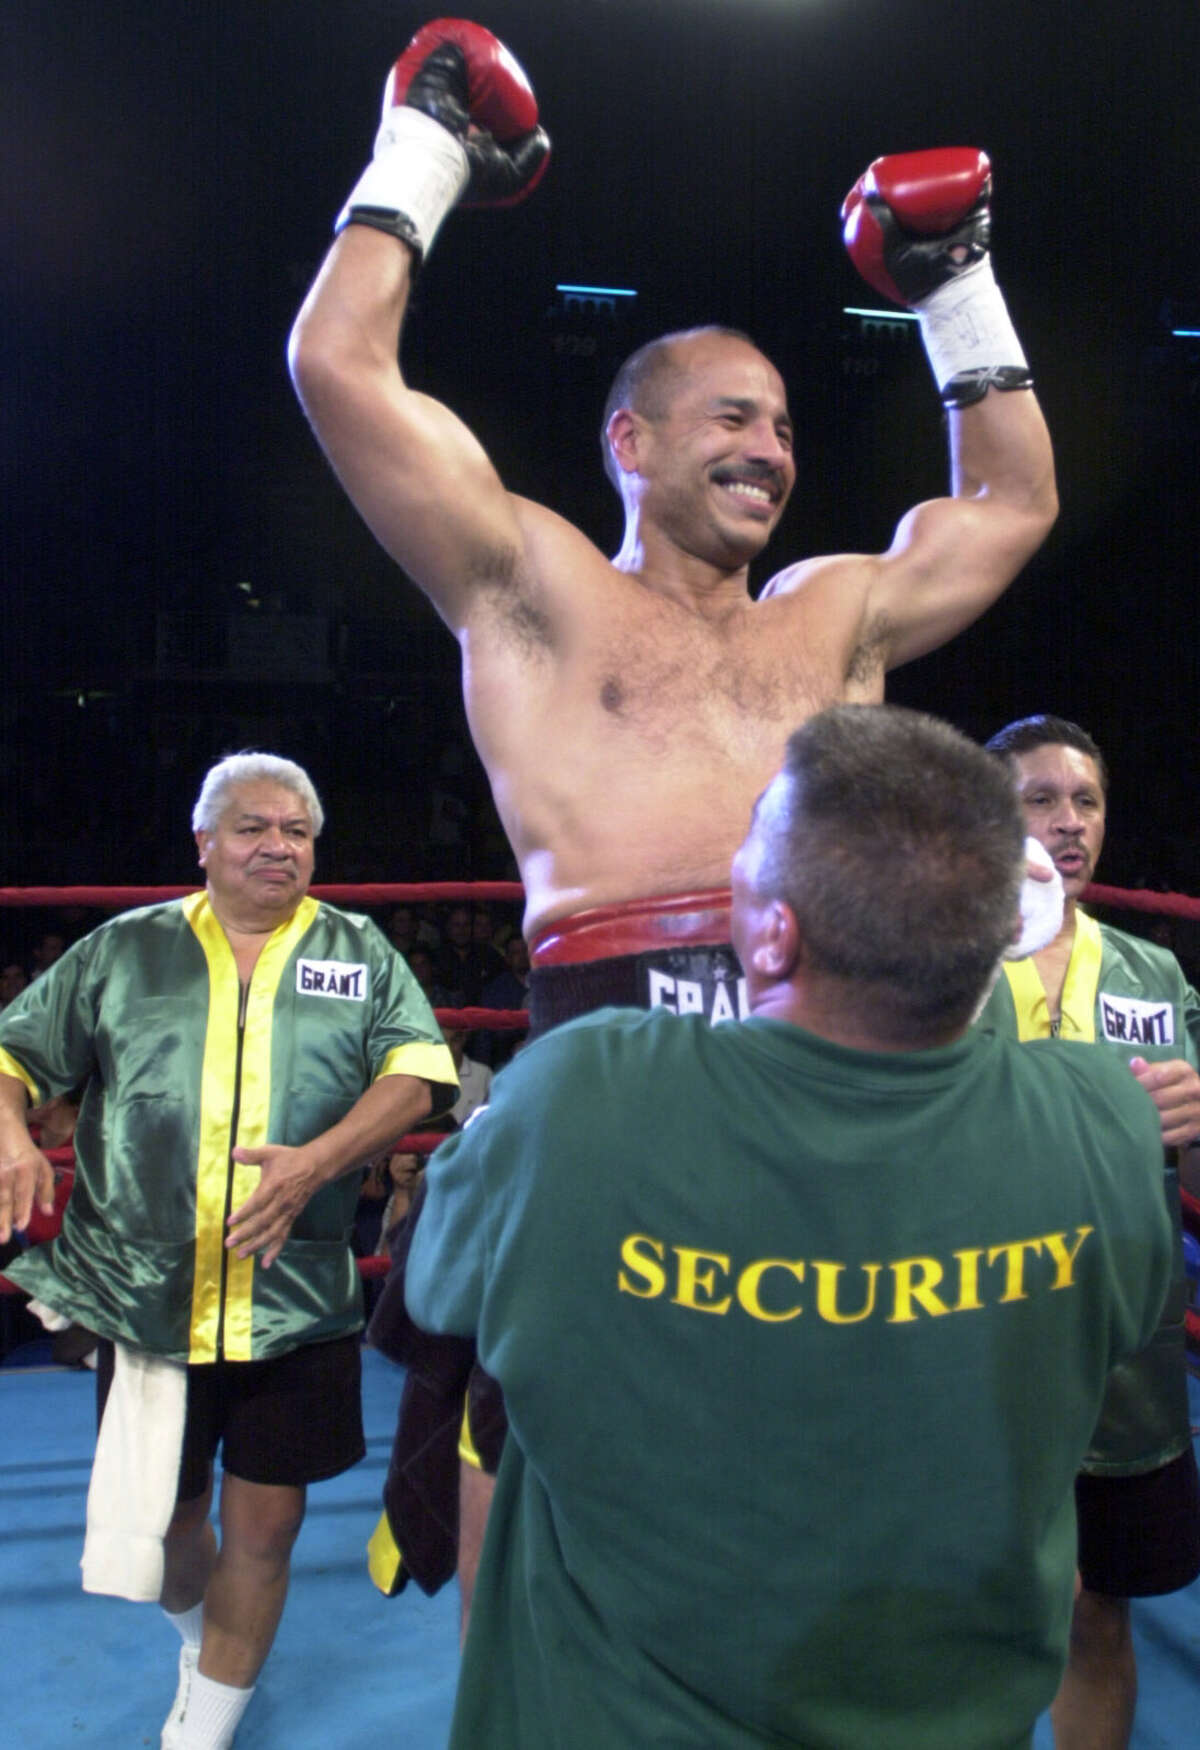 Tony Ayala, Jr. celebrates his victory in his last fight April 15, 2000. Tony Ayala, Sr. stands in the background at left.